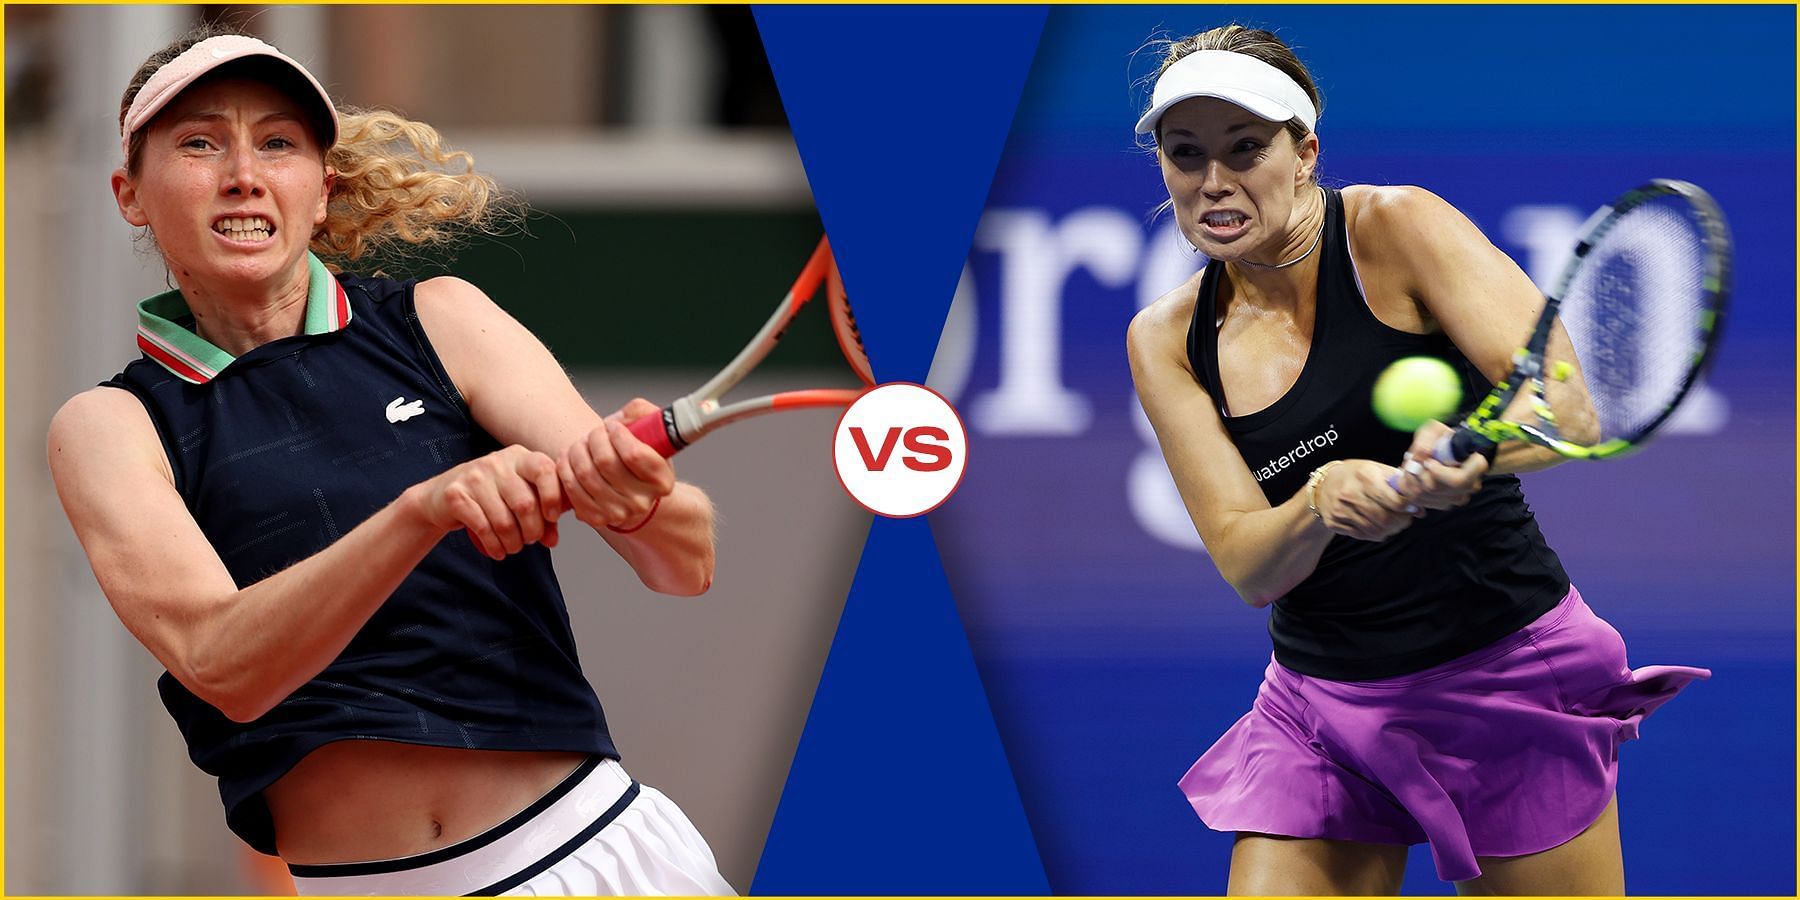 Danielle Collins will square off against Cristina Bucsa in the second round of the US Open